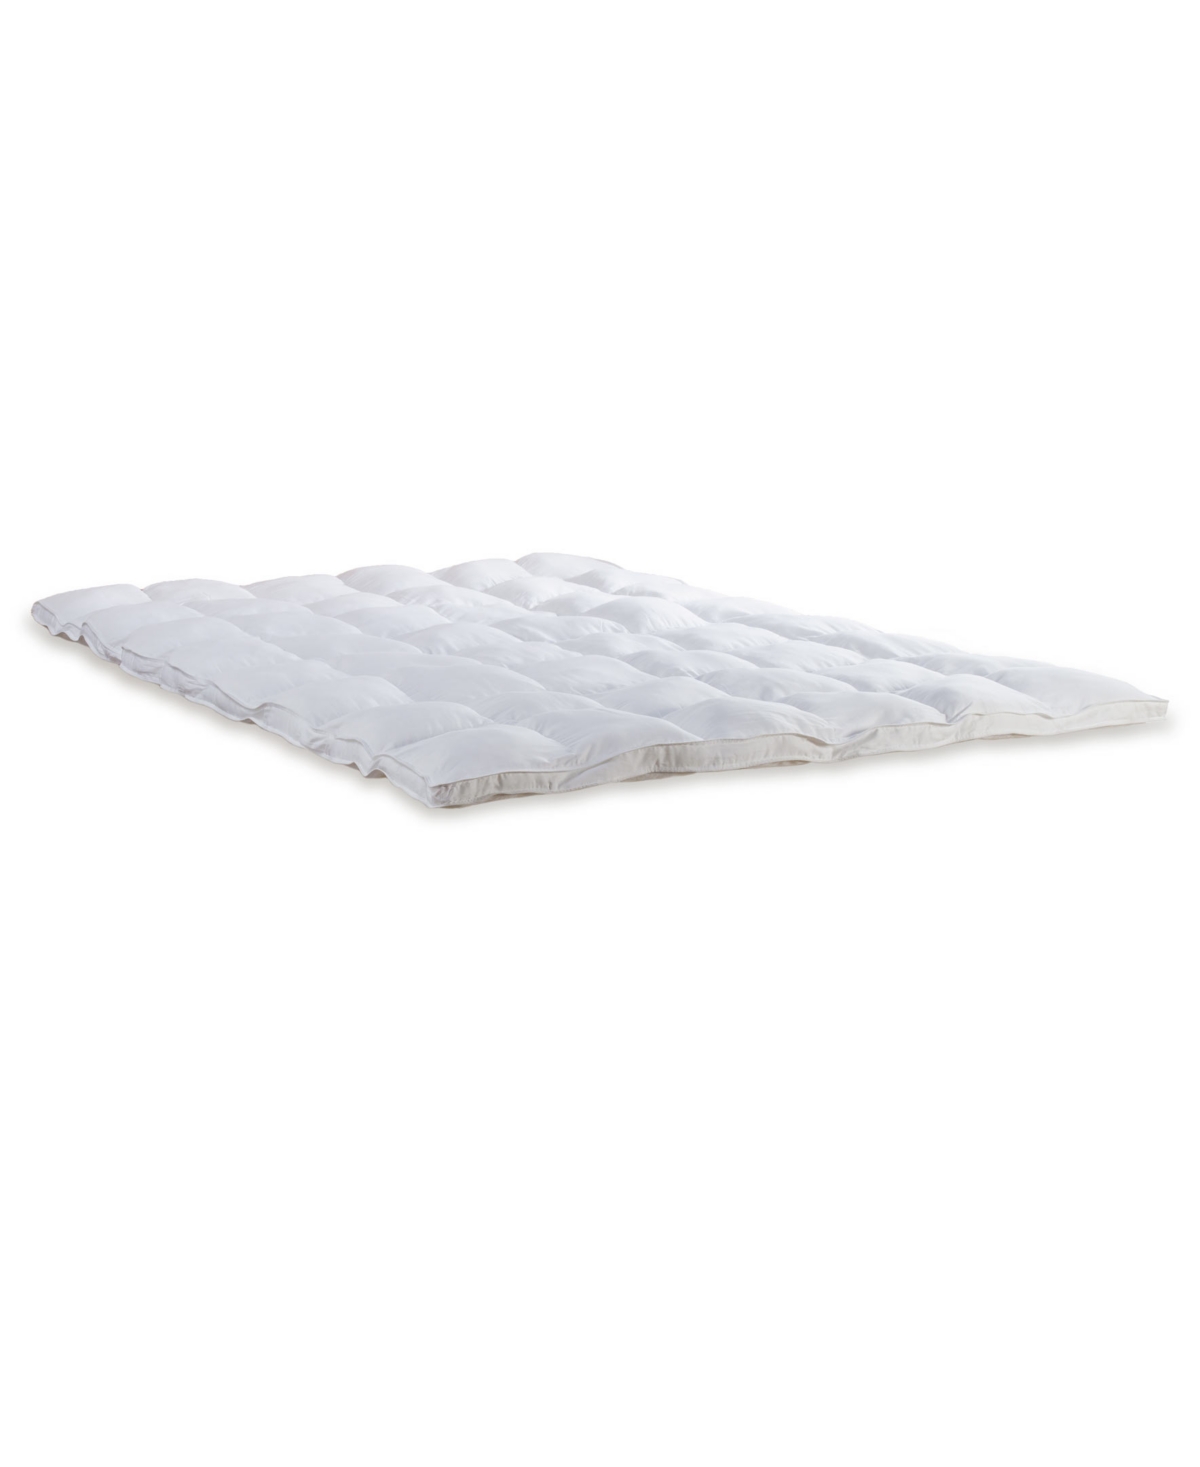 Beyond Down Fiberbed, Twin In White